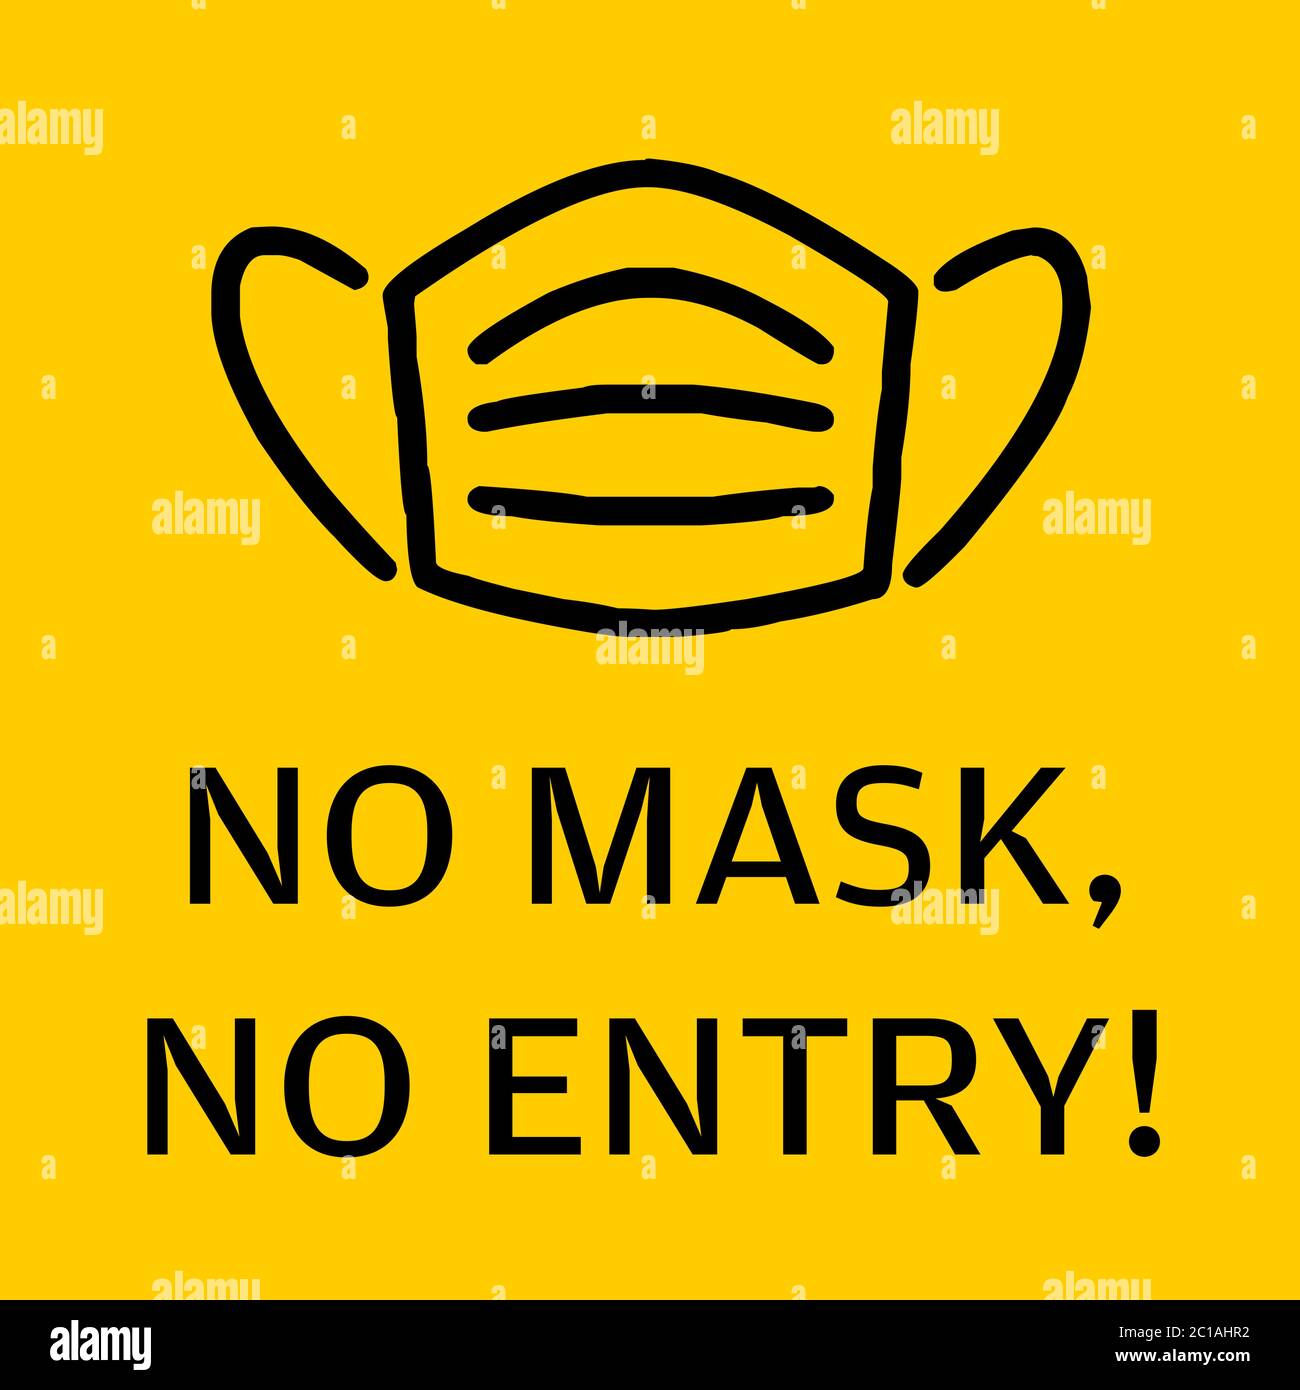 No Entry without Face Mask pictogram vector illustration to protect from COVID-19 Coronavirus Pandemic. Stock Vector